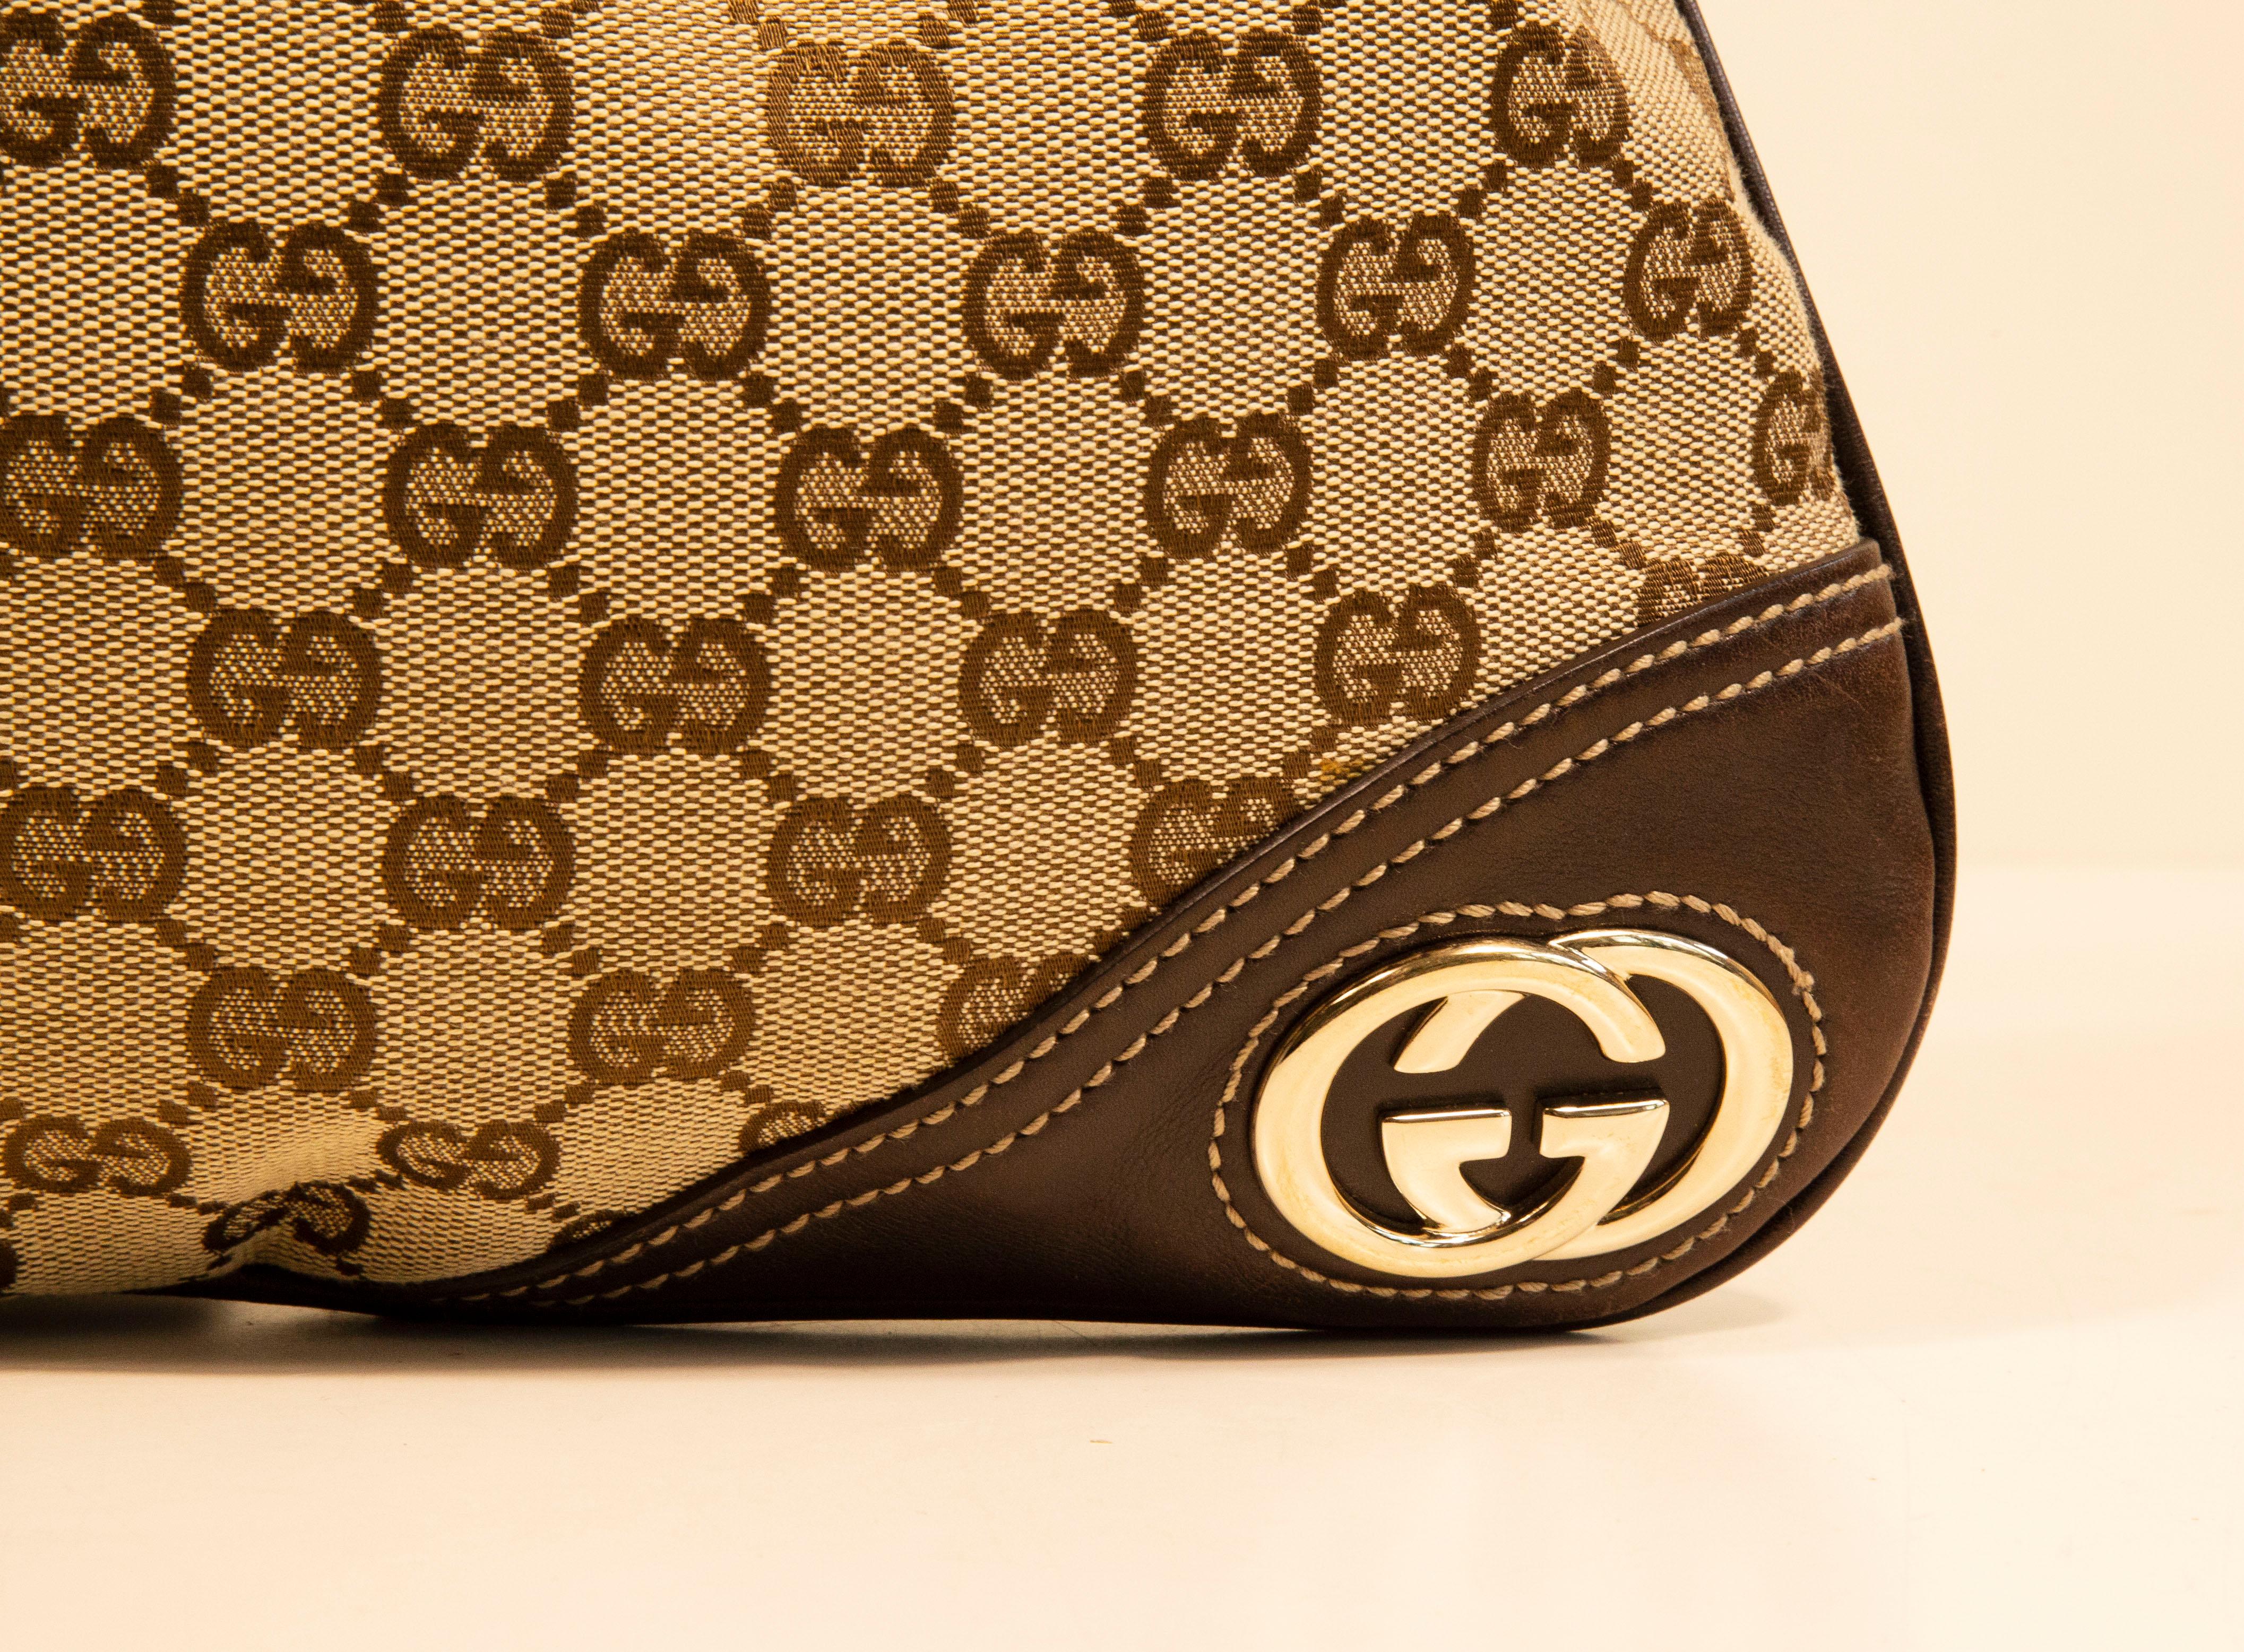 A Gucci New Britt hobo bag/shoulder bag made of GG Guccissima canvas with brown leather trim and light gold toned hardware such a GG interlocking logo in the front left bottom corner. The interior is lined with fabric in green, red, and white